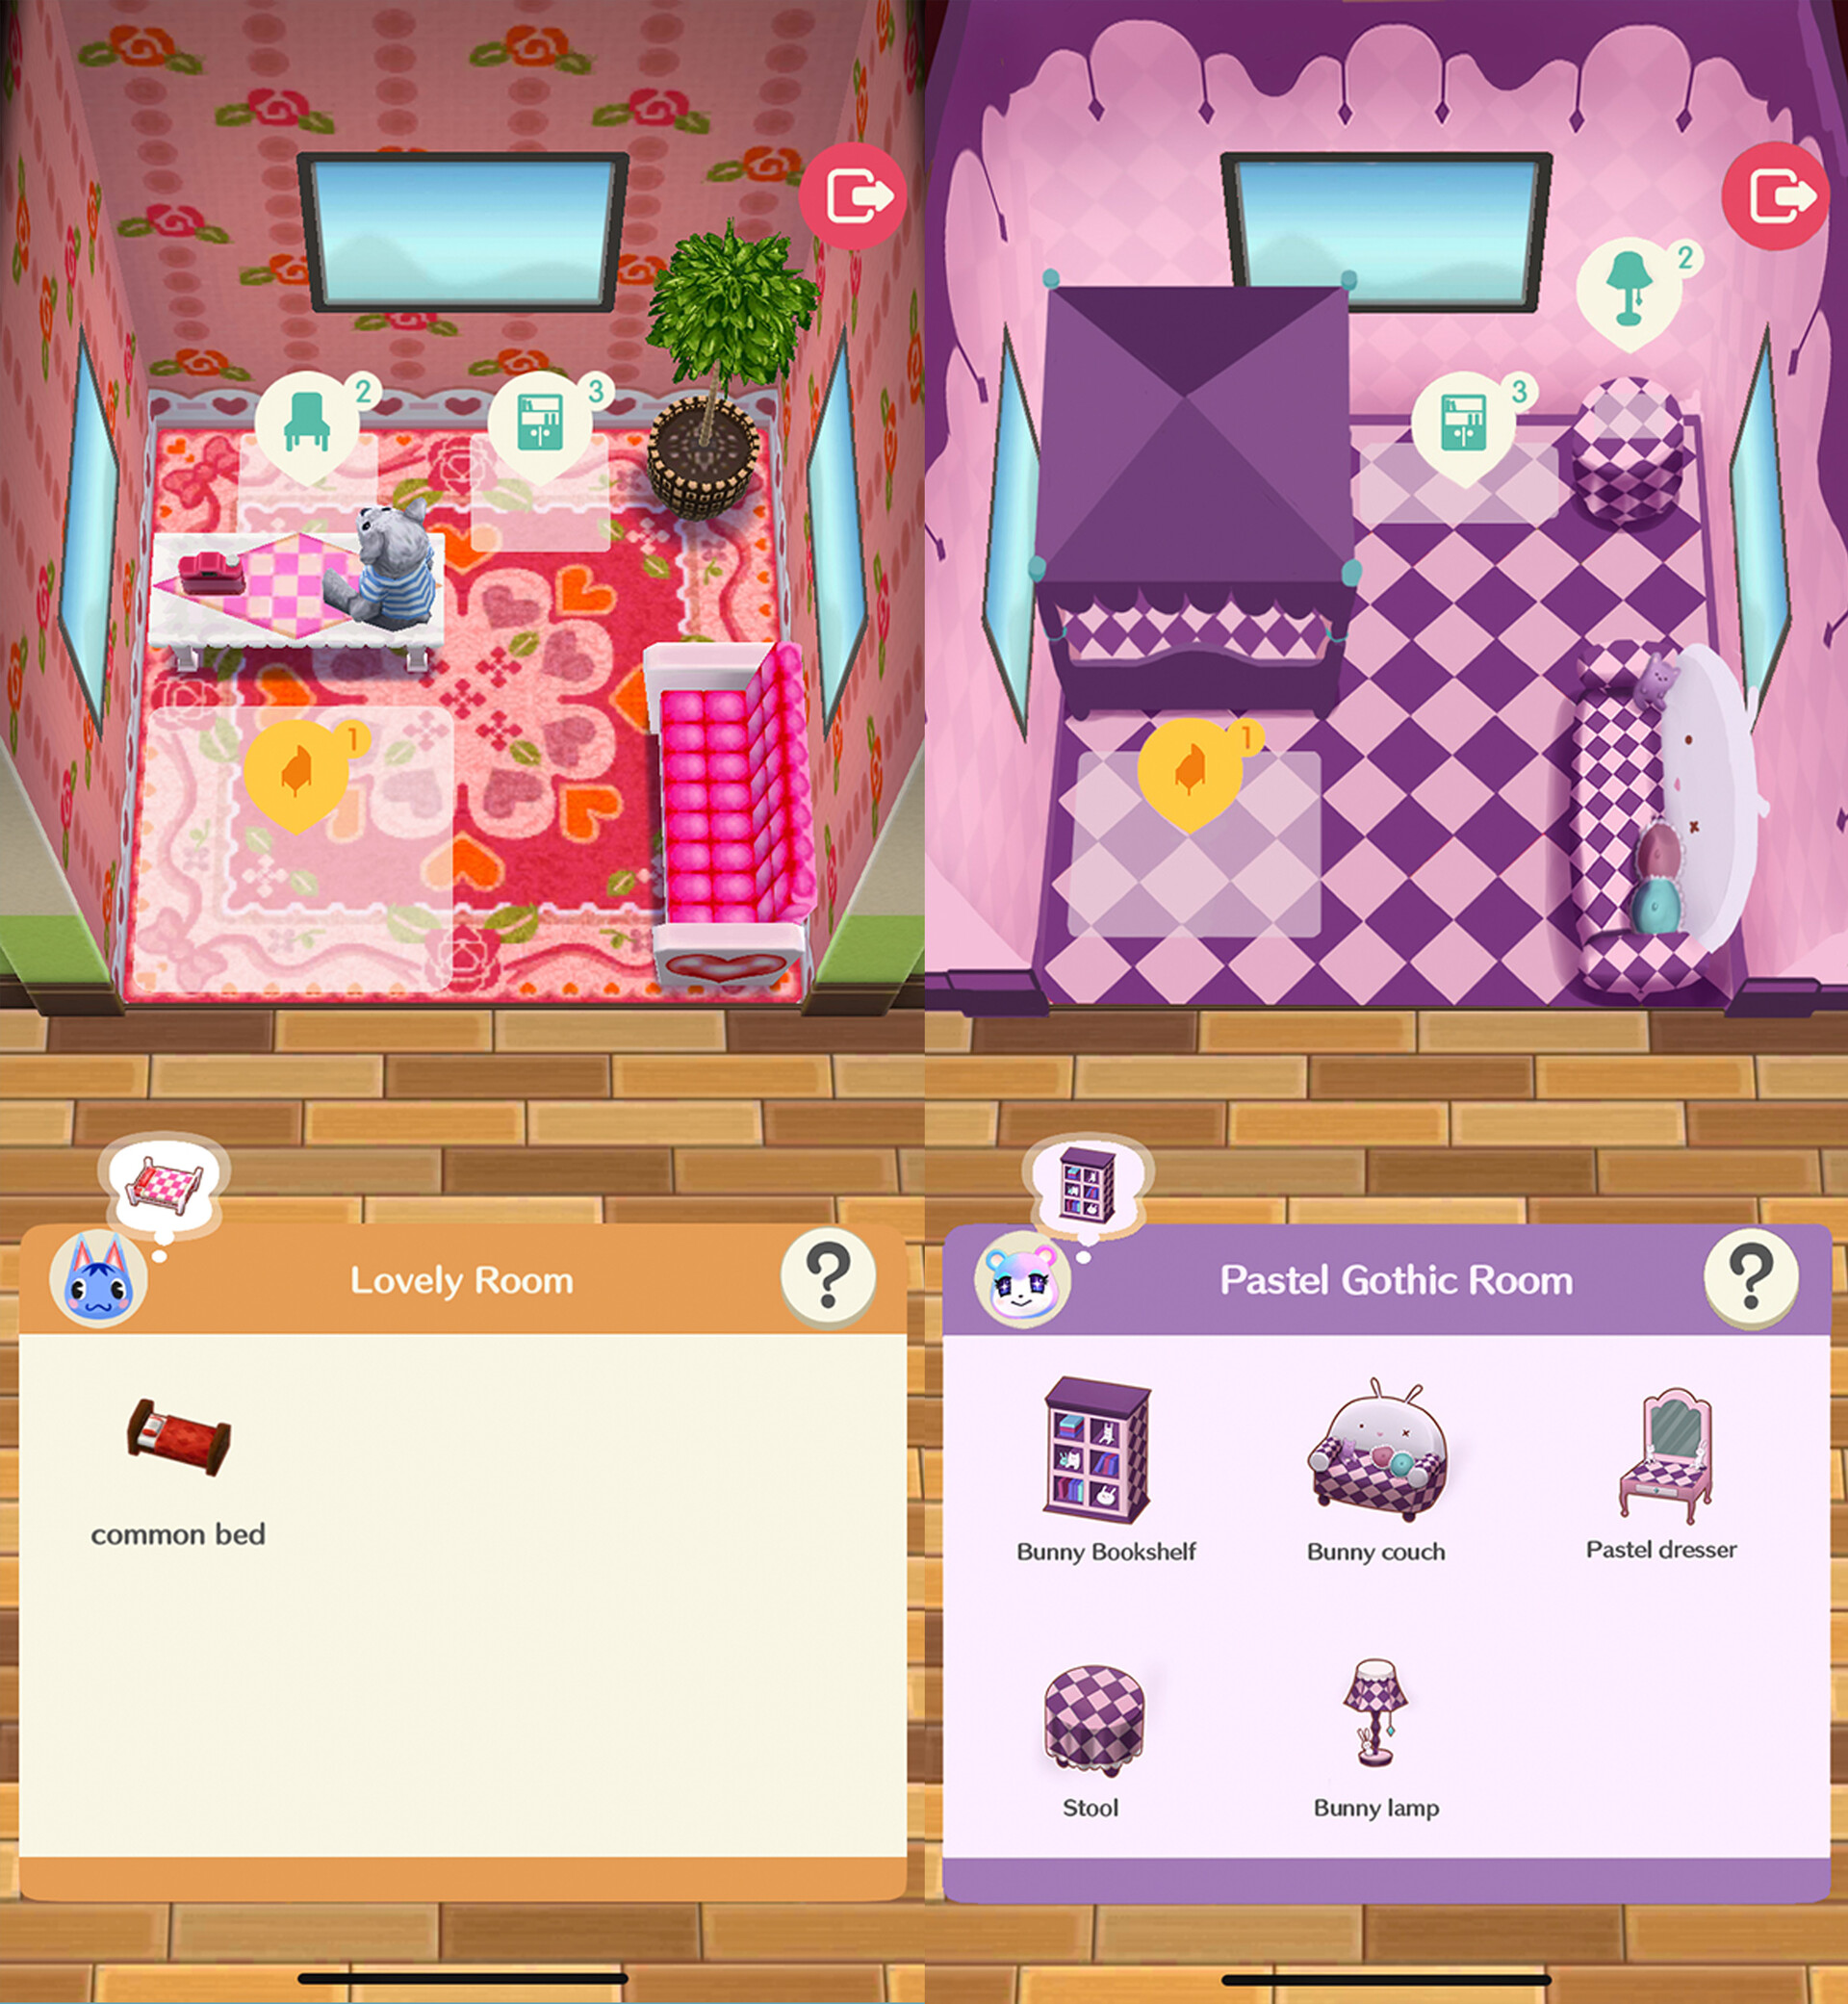 ArtStation - UI design: Animal crossing Pocket camp, changing the theme to  gothic (sentimental circus)